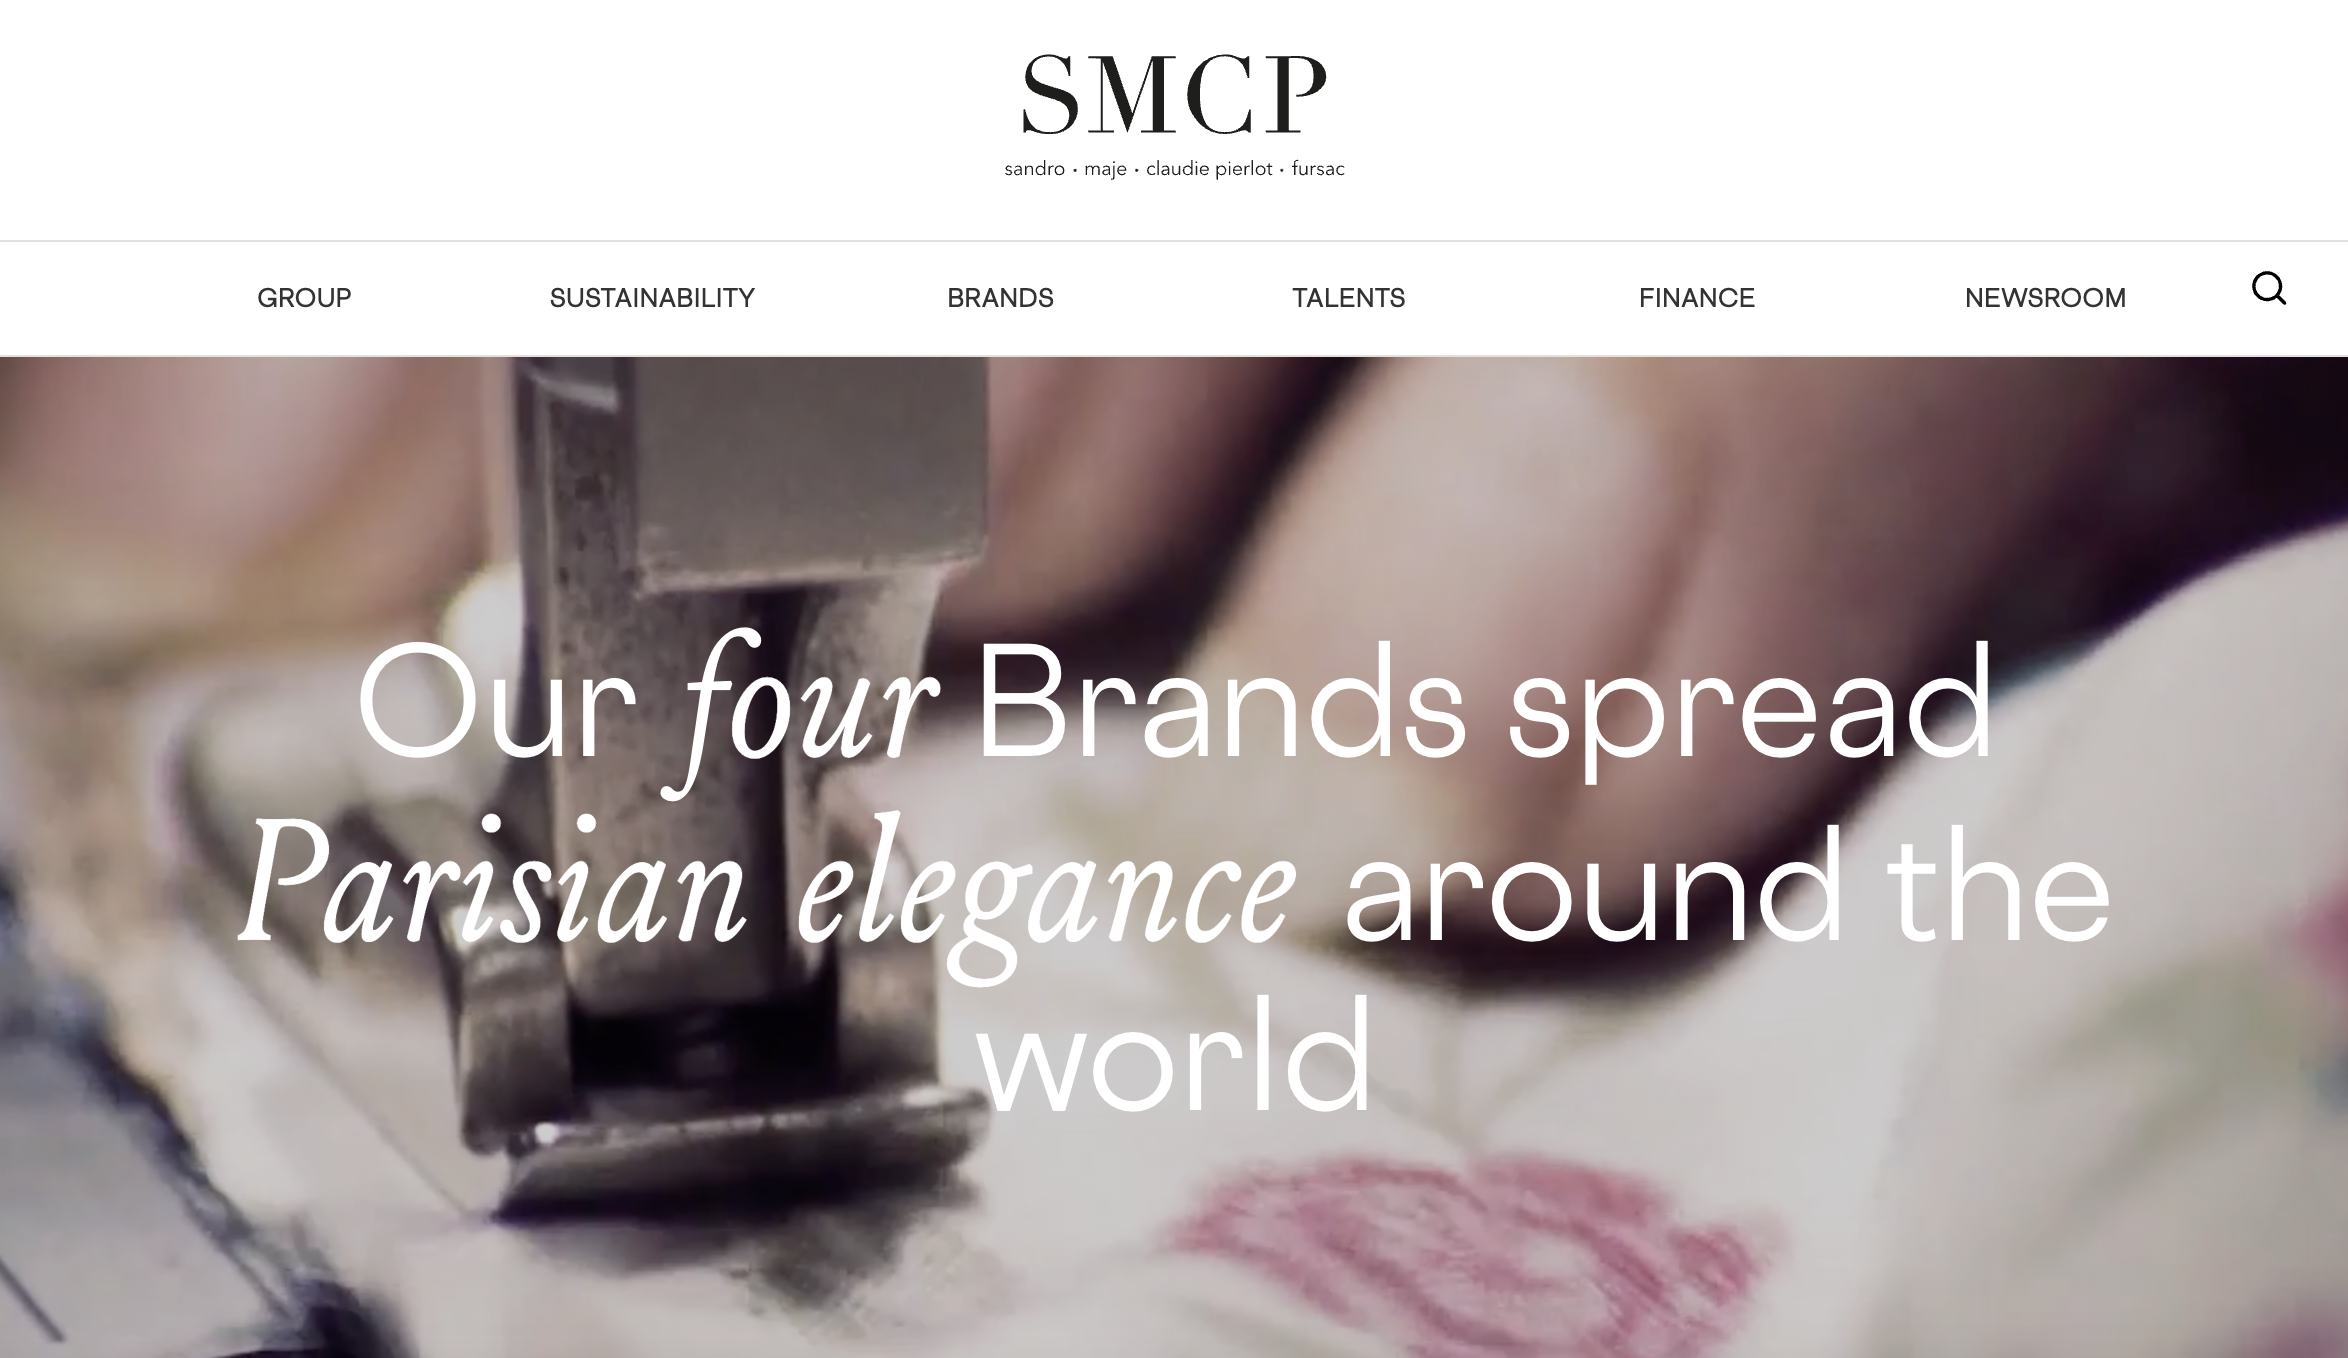 SMCP H1 FY2023 Sales Increased by 8% to €610 Million with the Recovery of Chinese Market